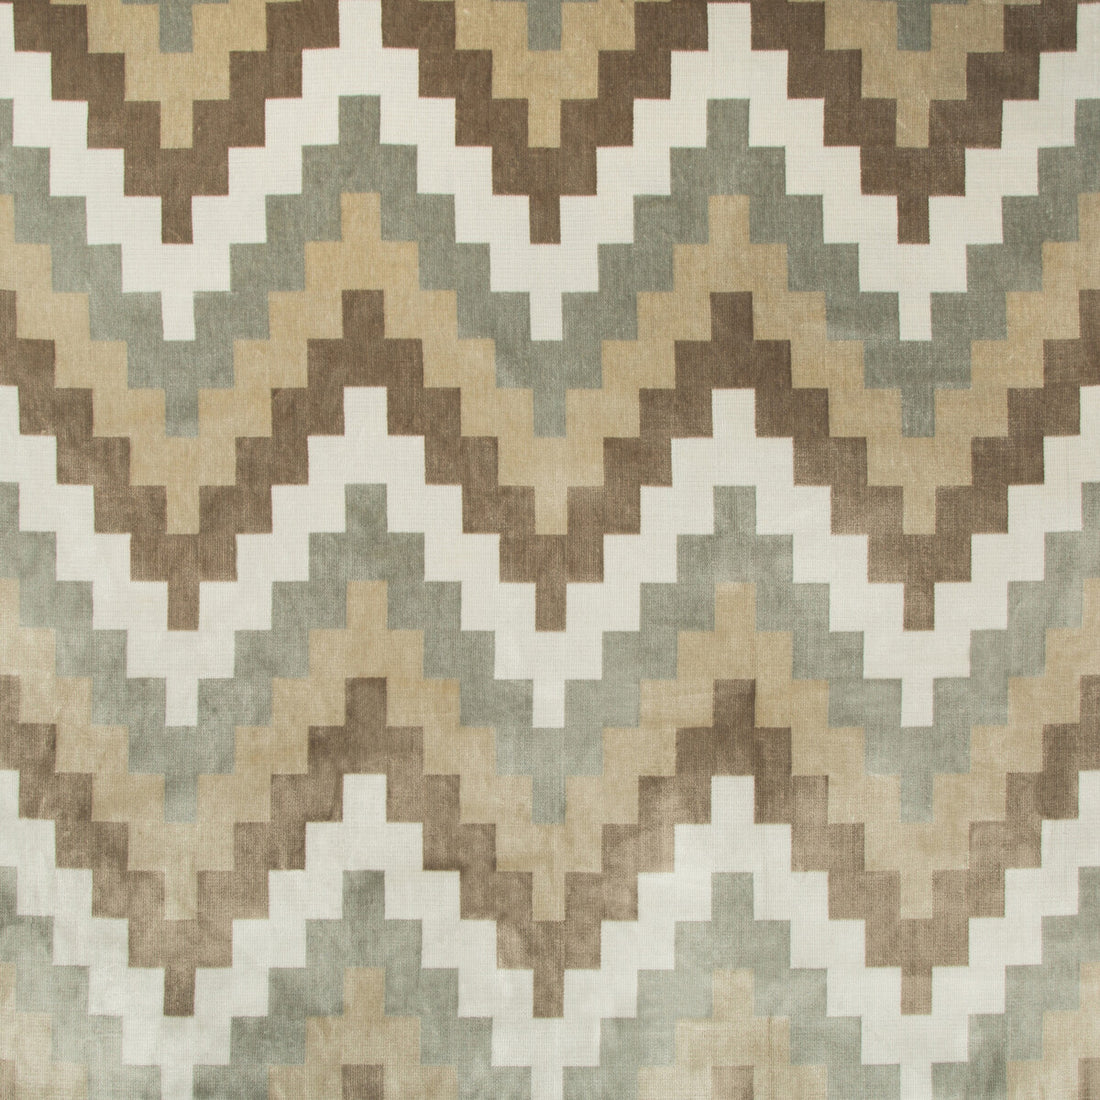 Qatari Velvet fabric in cloud color - pattern 35513.16.0 - by Kravet Design in the Barclay Butera Sagamore collection